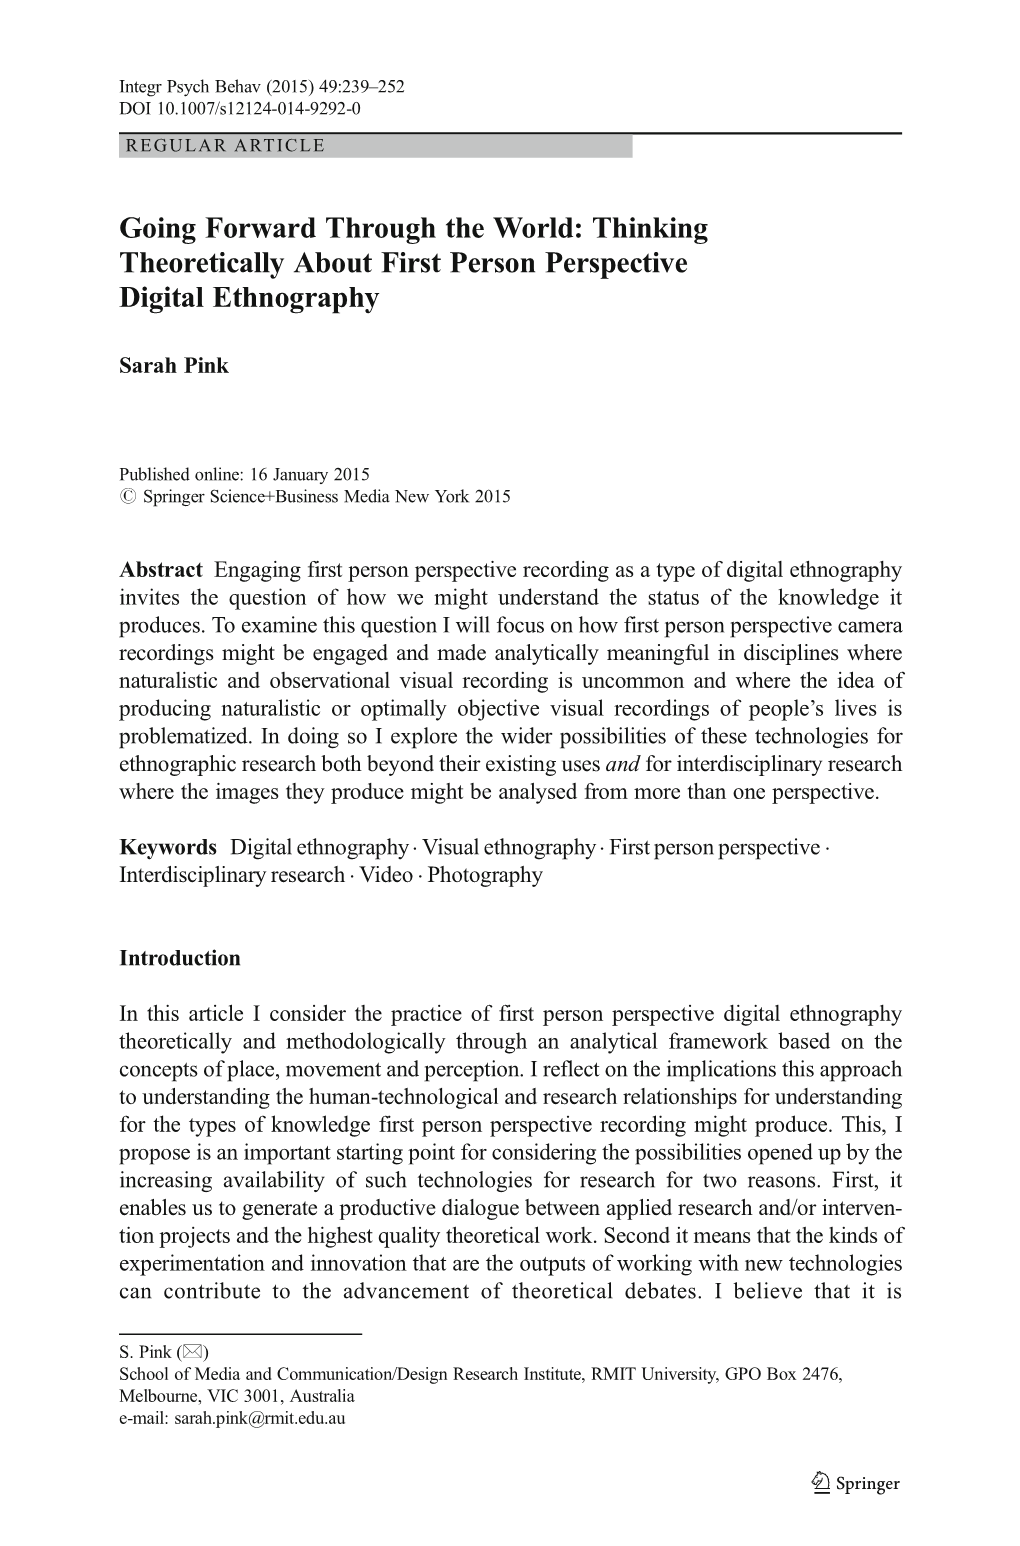 Thinking Theoretically About First Person Perspective Digital Ethnography